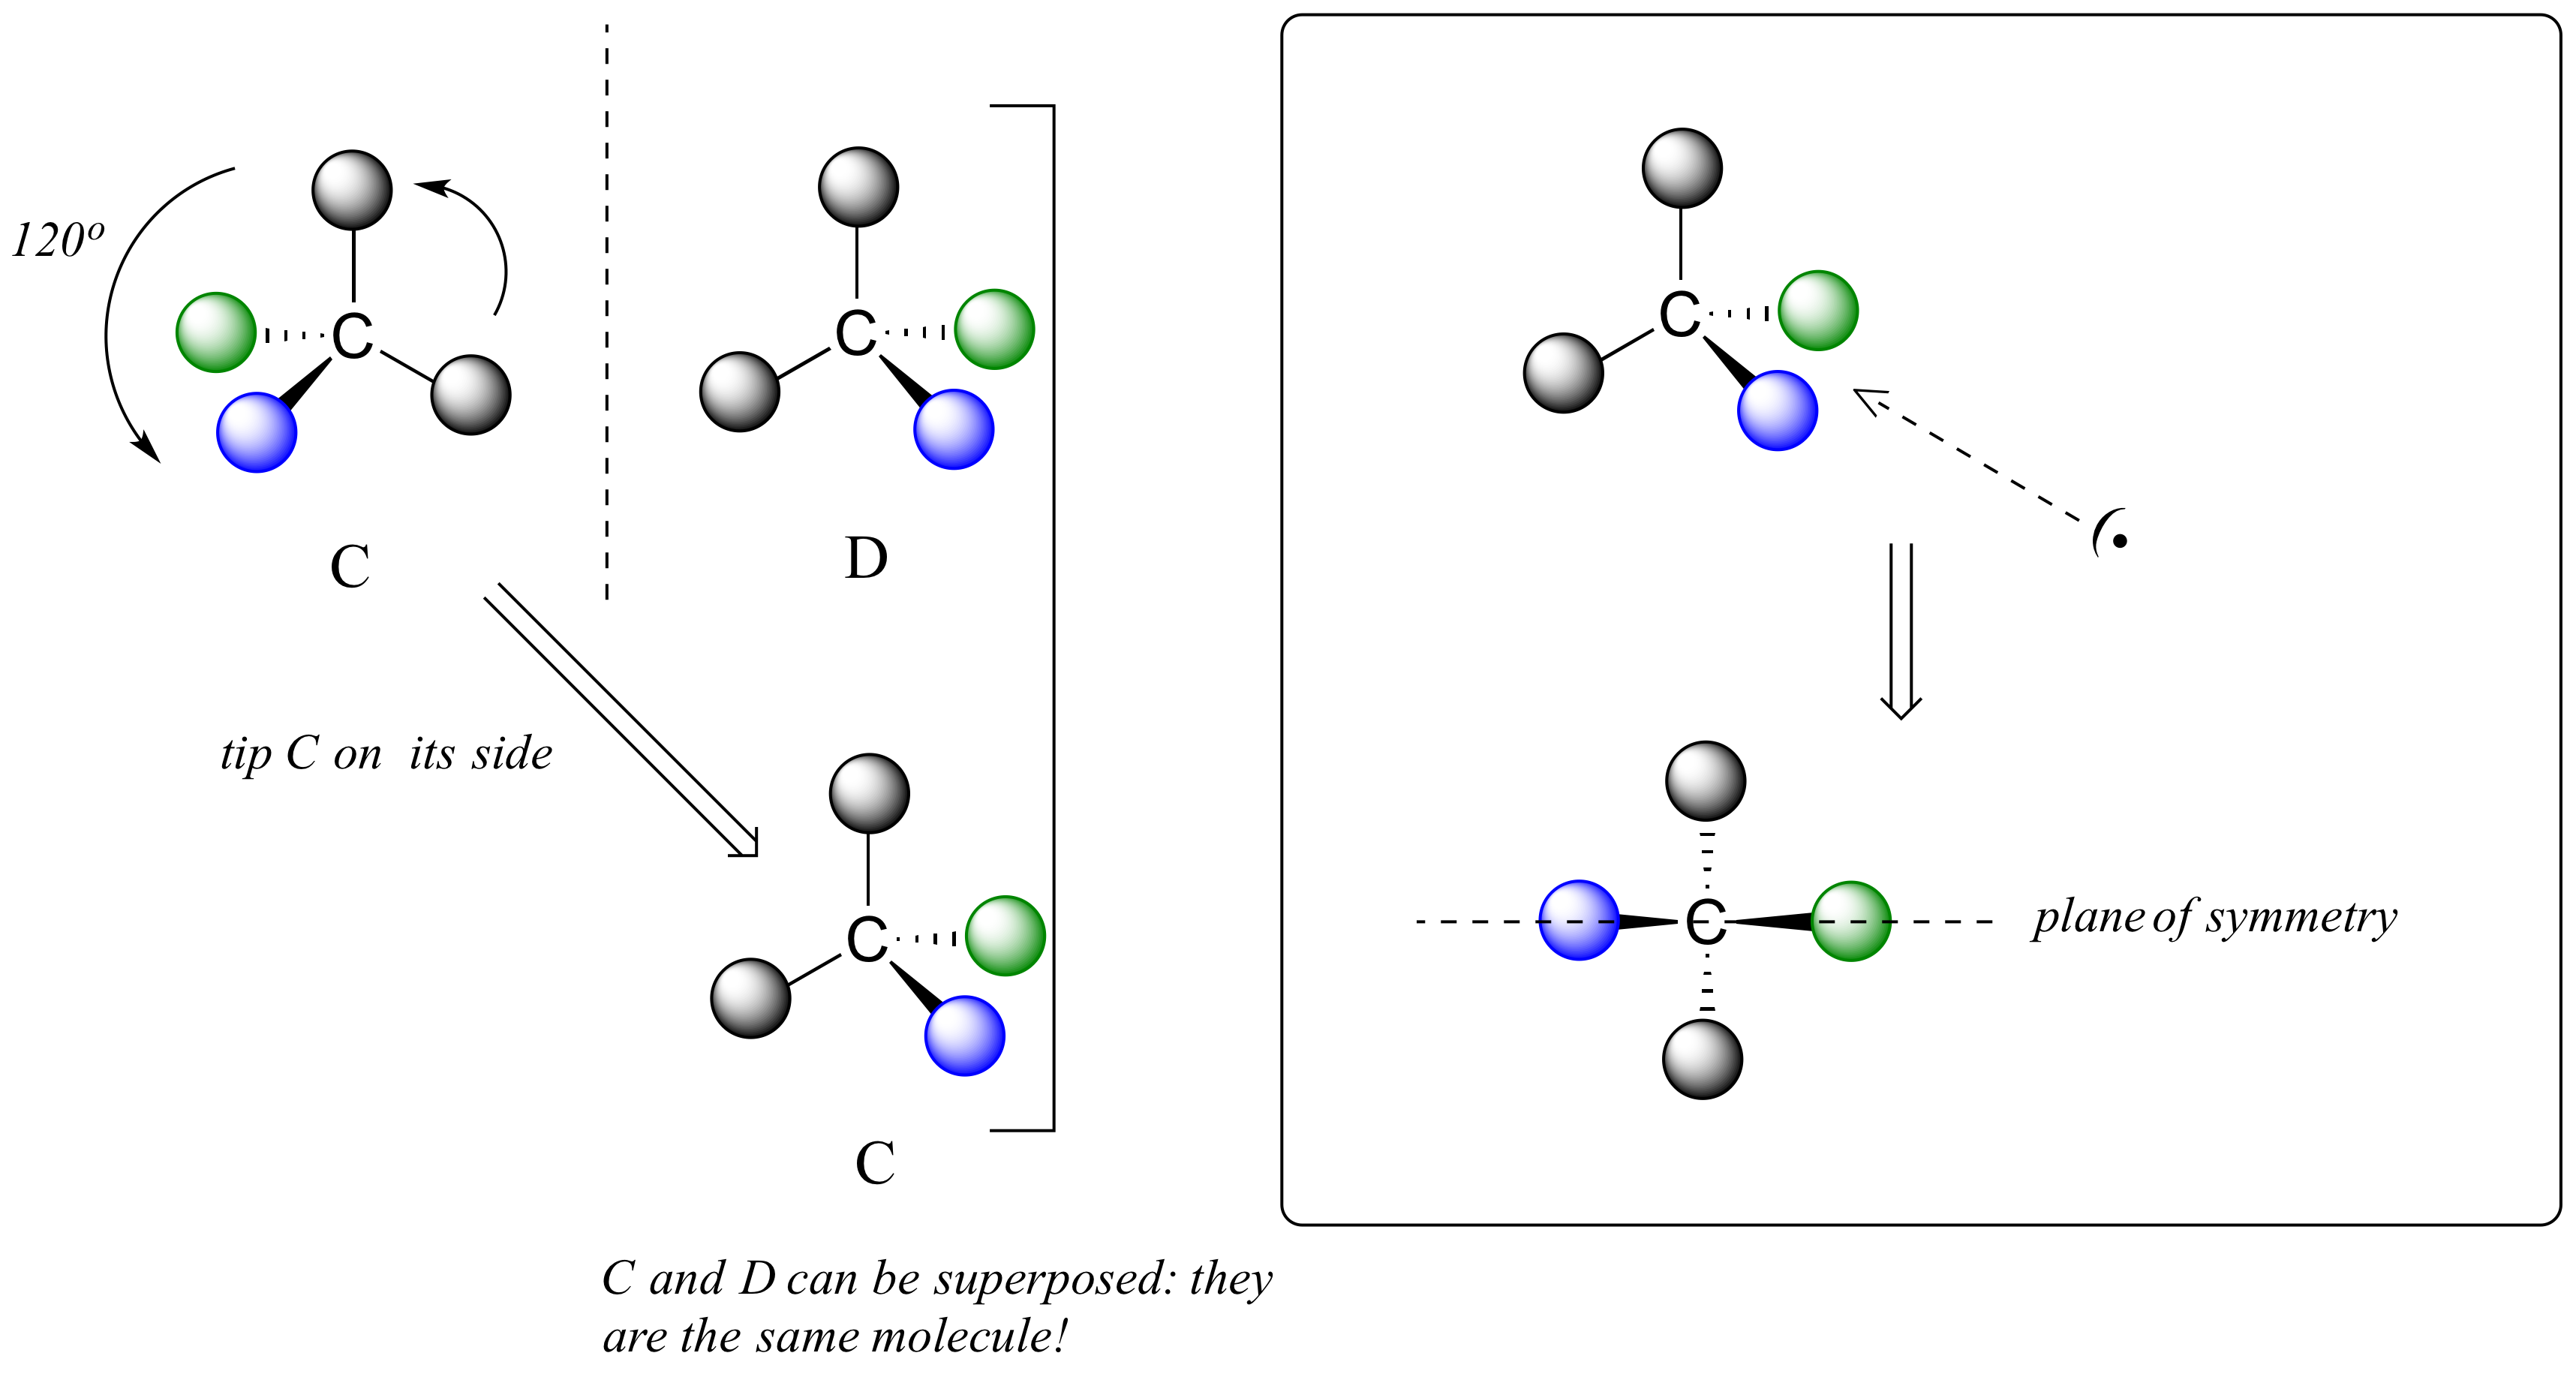 Two structures similar to A and B are shown, these are C and D. In these models the central carbon is surrounded by 2 grey balls, with bonds drawn as regular lines. Structure C has a blue sphere connected by a wedge and a green ball connected by a dashed wedge. Structure D is the mirror image of C. Flipping C (shown) gives a structure which is superimposable on structure D, and thus structures C and D are identical. C and D are the same molecule. An internal plane of symmetry is also shown within this molecule, bisecting the green and blue spheres and the central carbon..